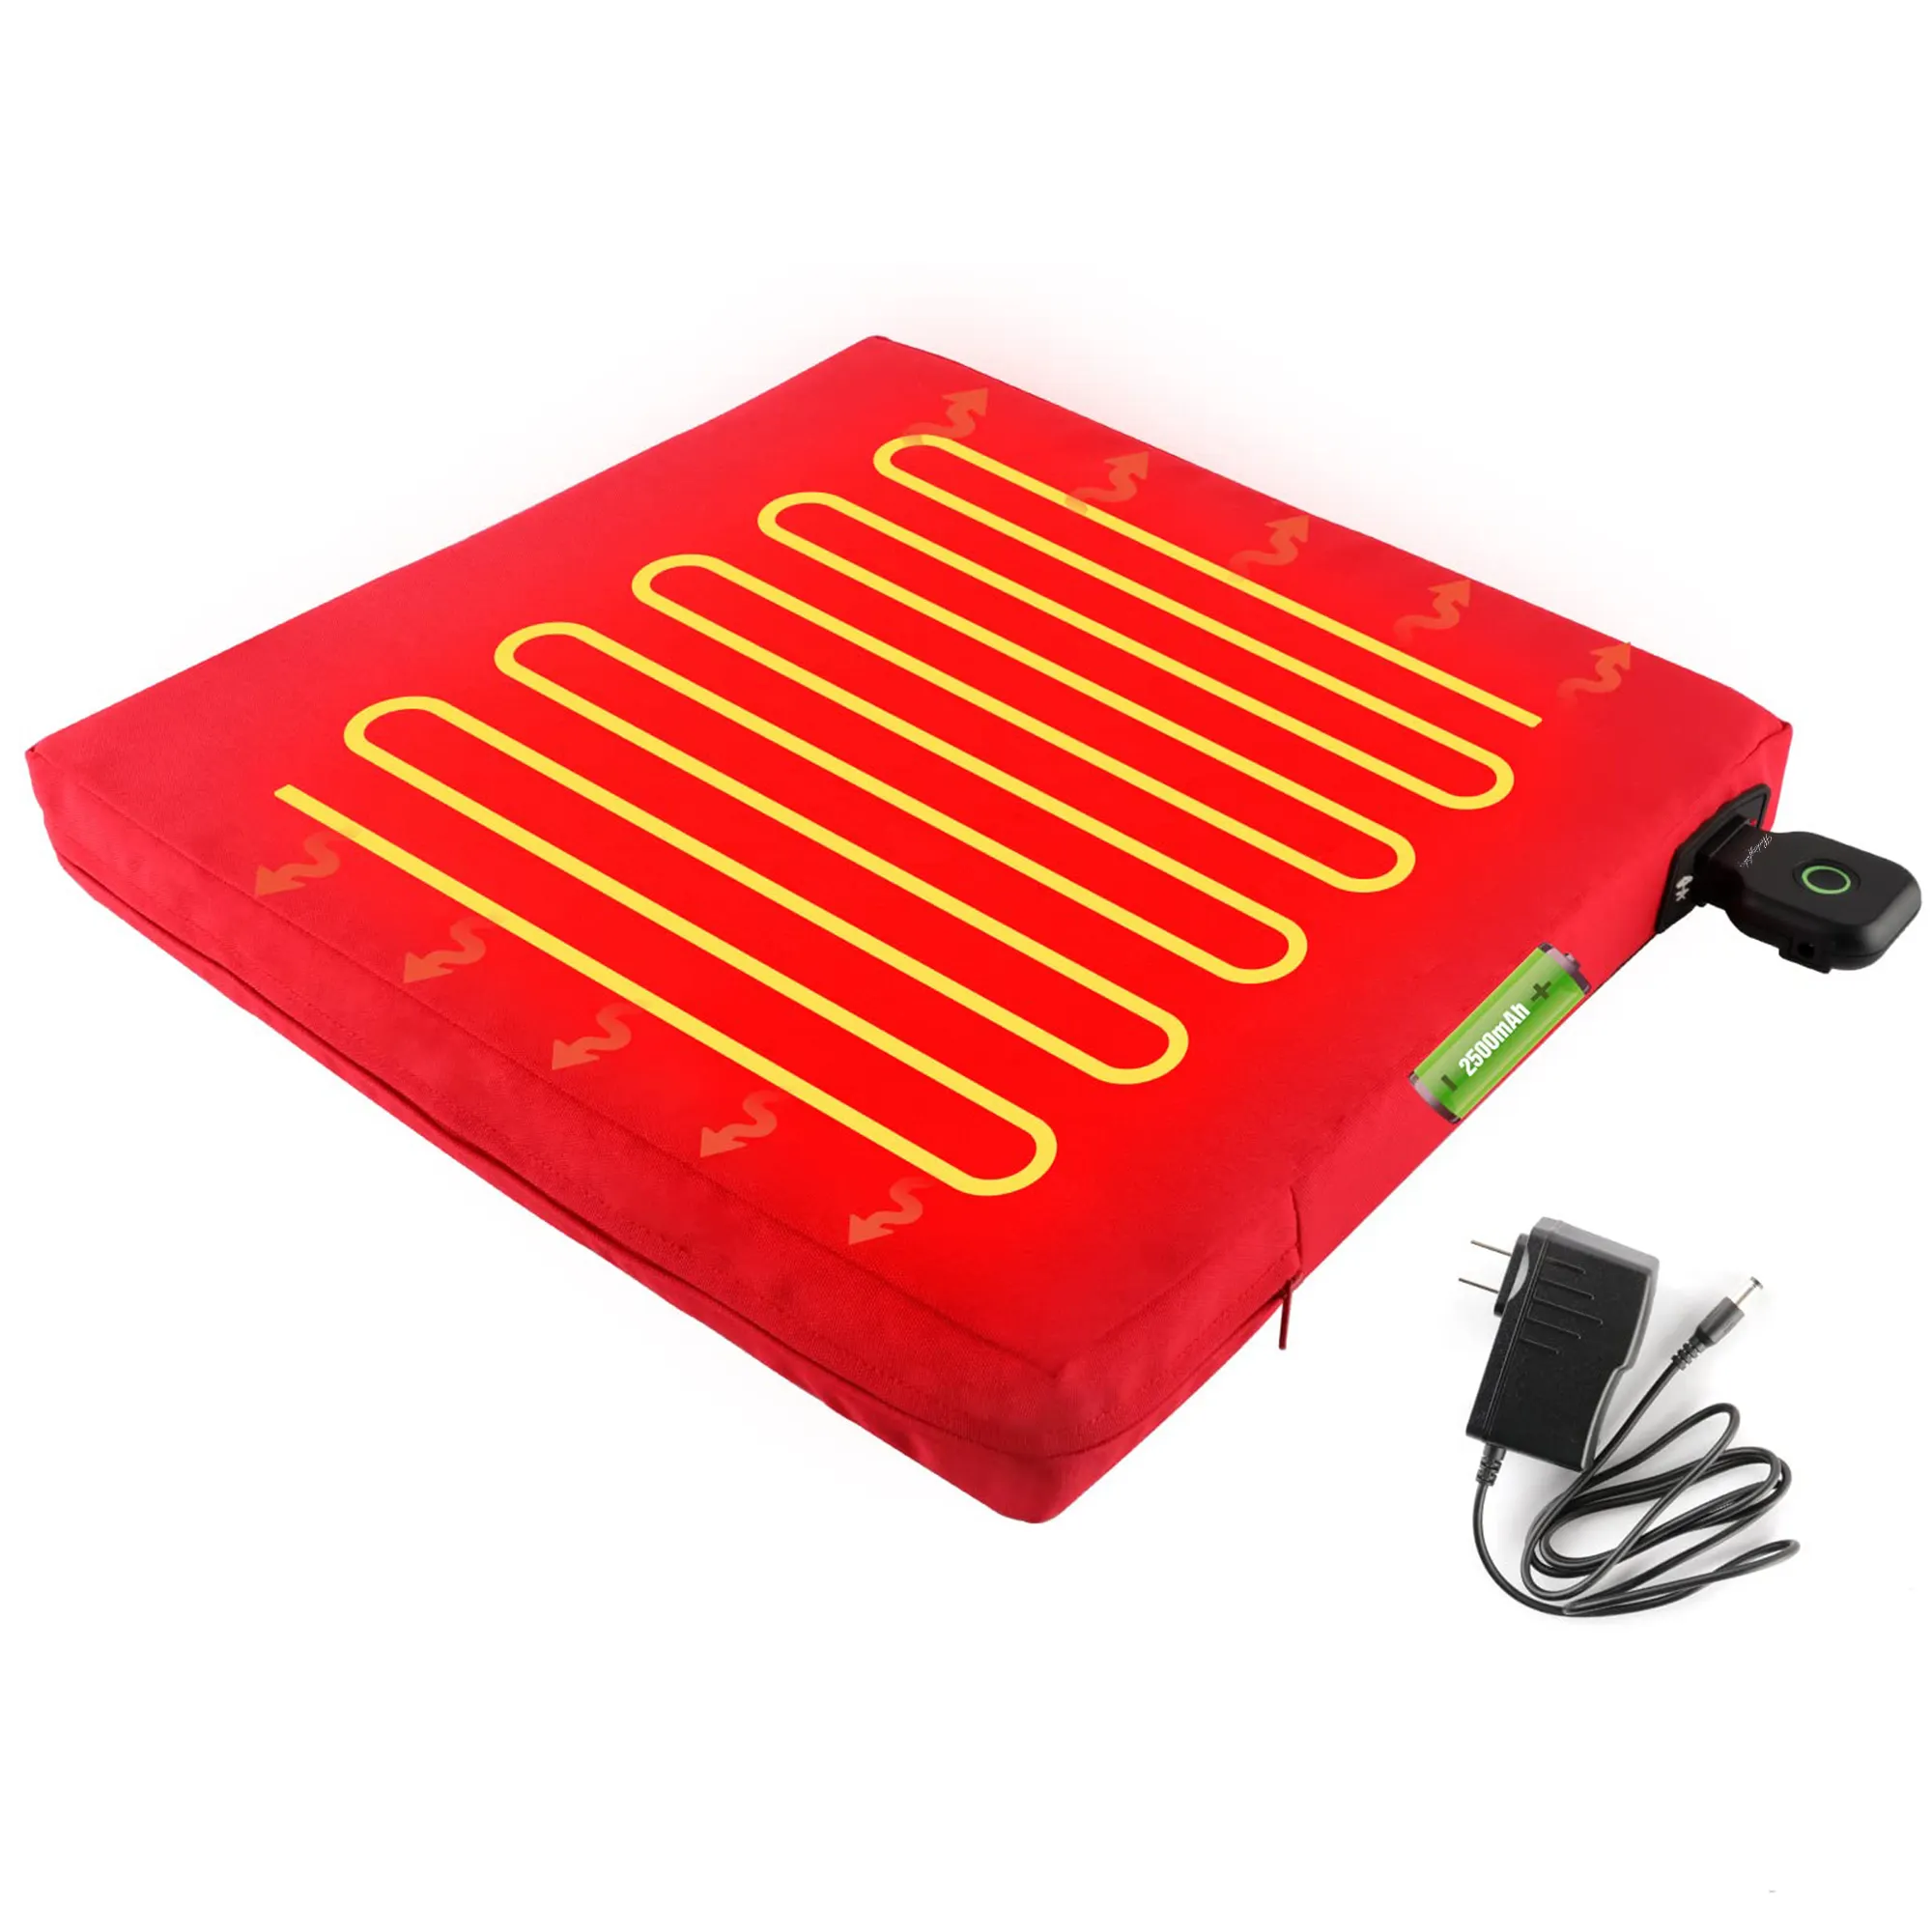 Workingfish High Quality Wholesaler Output Voltage 12.6V With 5521DC Plug Portable Battery Heated Seat Cushion